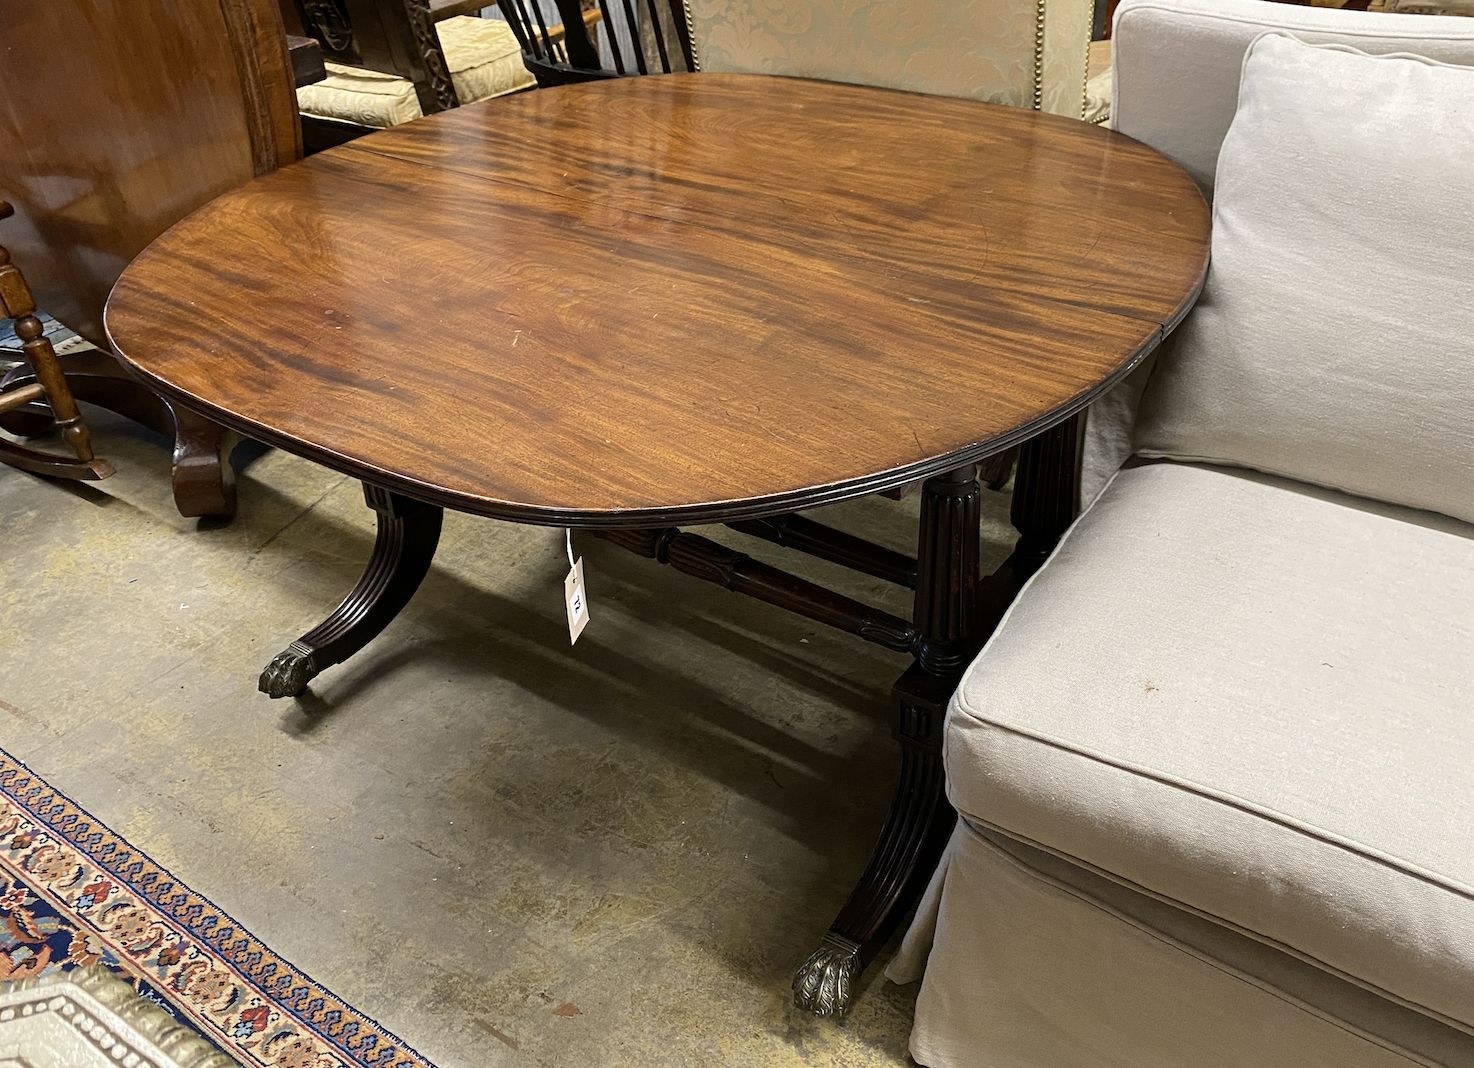 A George IV oval mahogany dining table (no leaves, altered), length 118cm, width 120cm, height 71cm